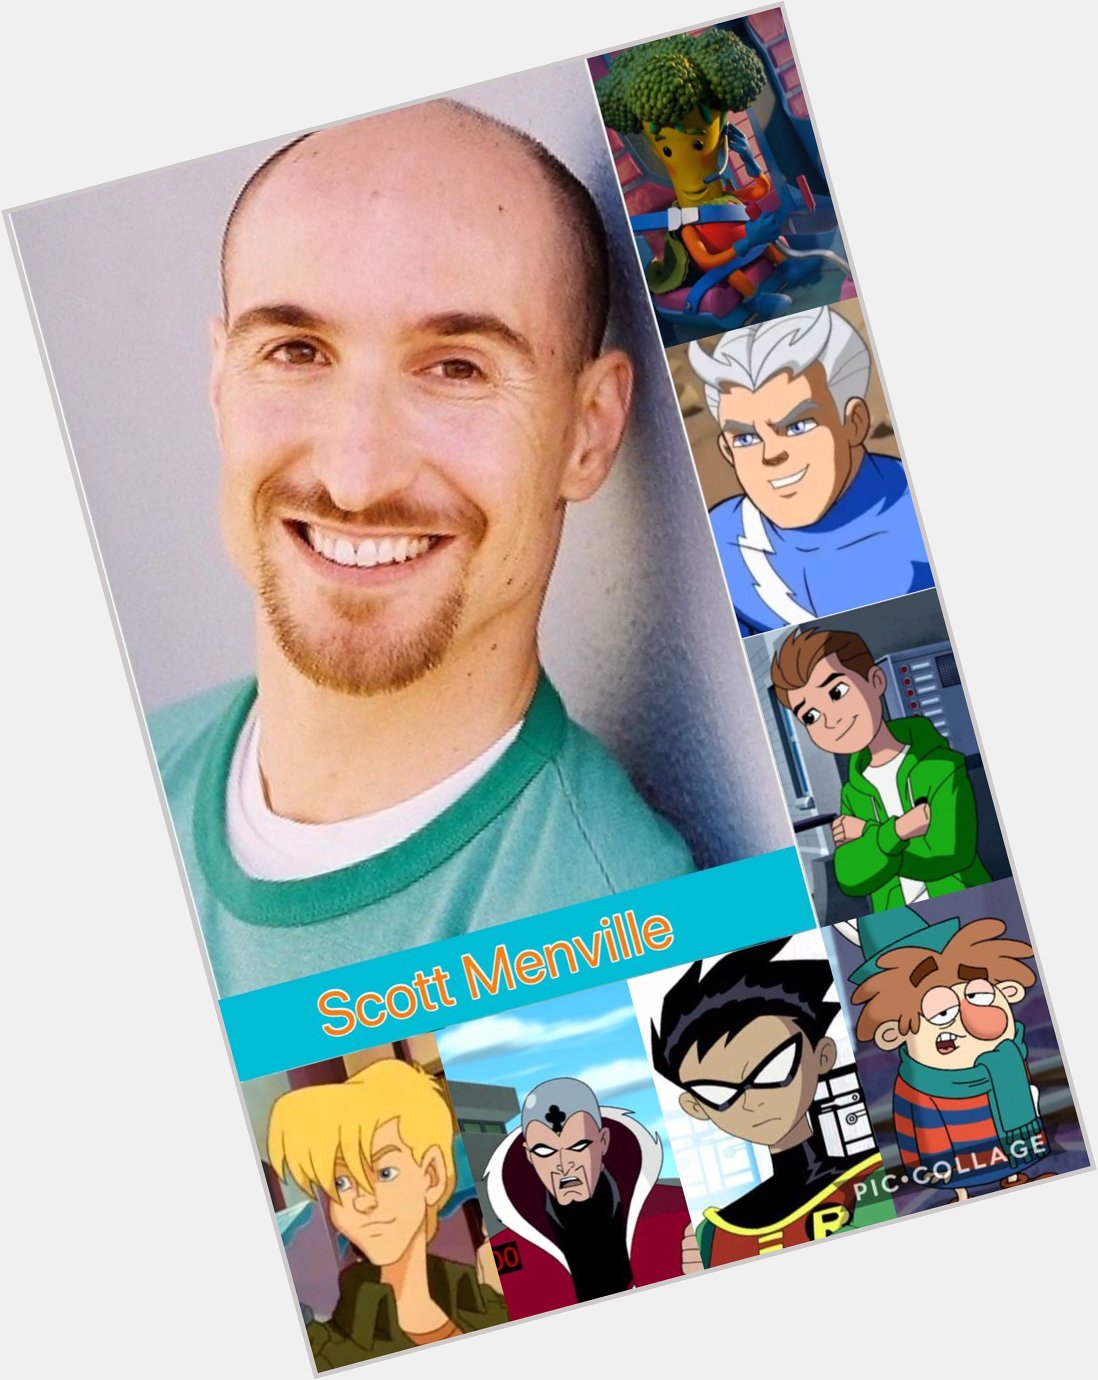 Happy Birthday Scott Menville  Thank you for the amazing voices that you created! 